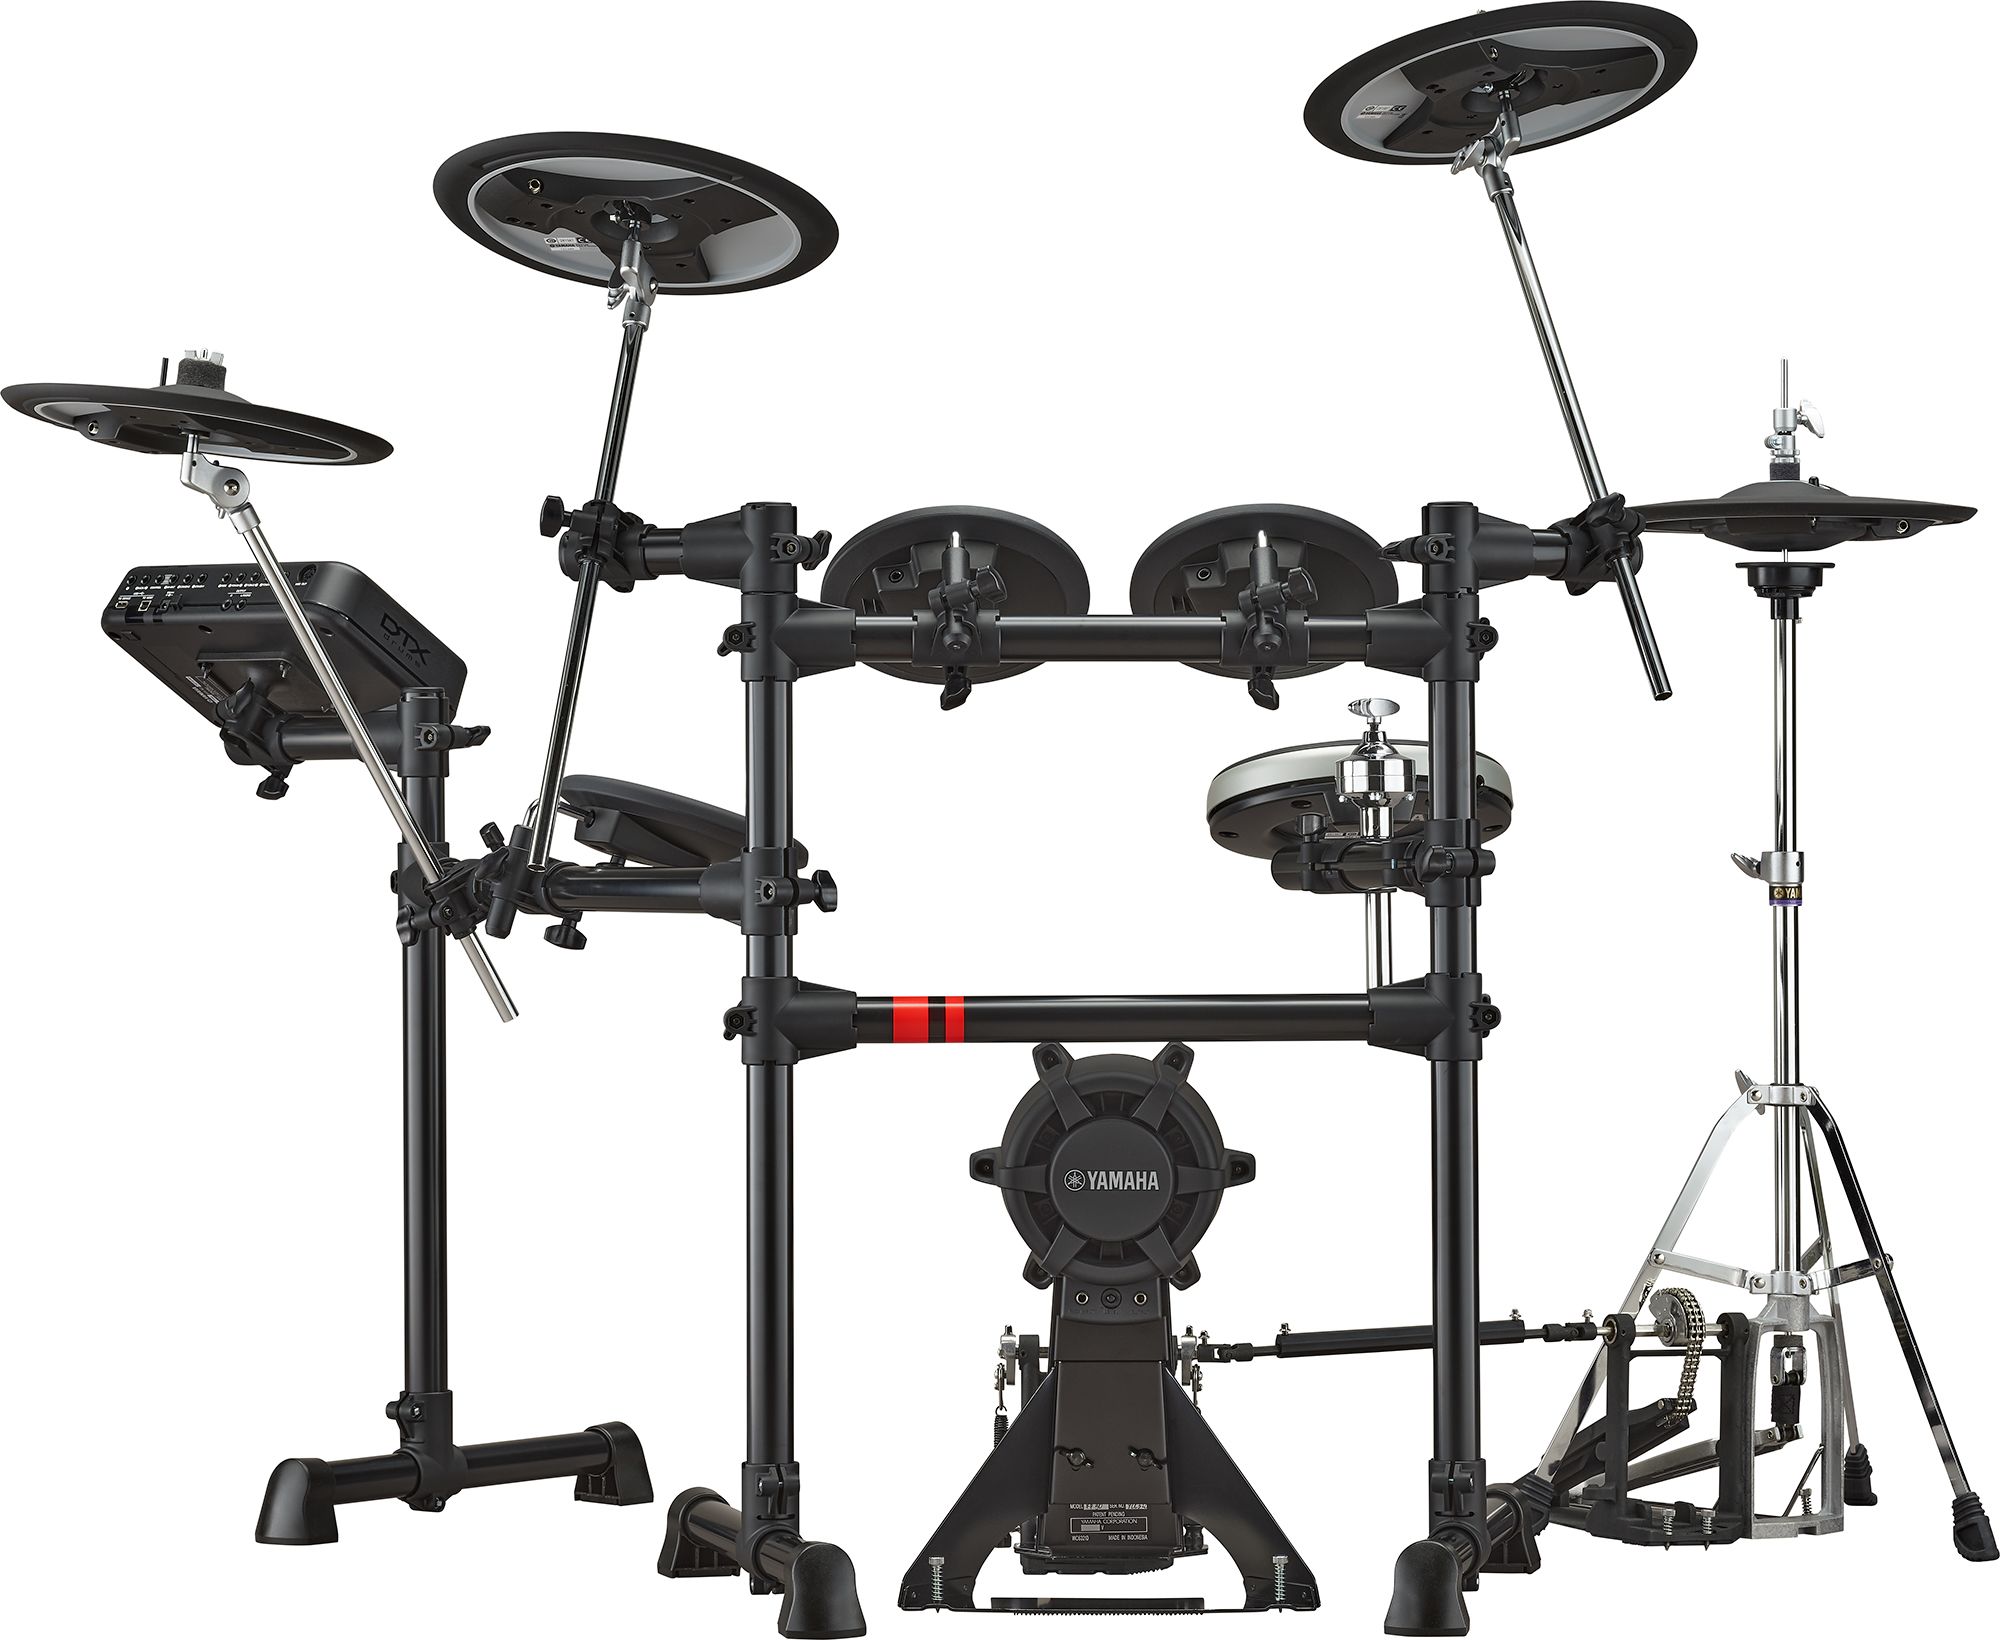 Products - America Electronic - DTX6 Yamaha - Africa / Drum Latin / Oceania - Kits Musical - East / Middle / - Products Asia Electronic Series - Drums - CIS Drums / Instruments